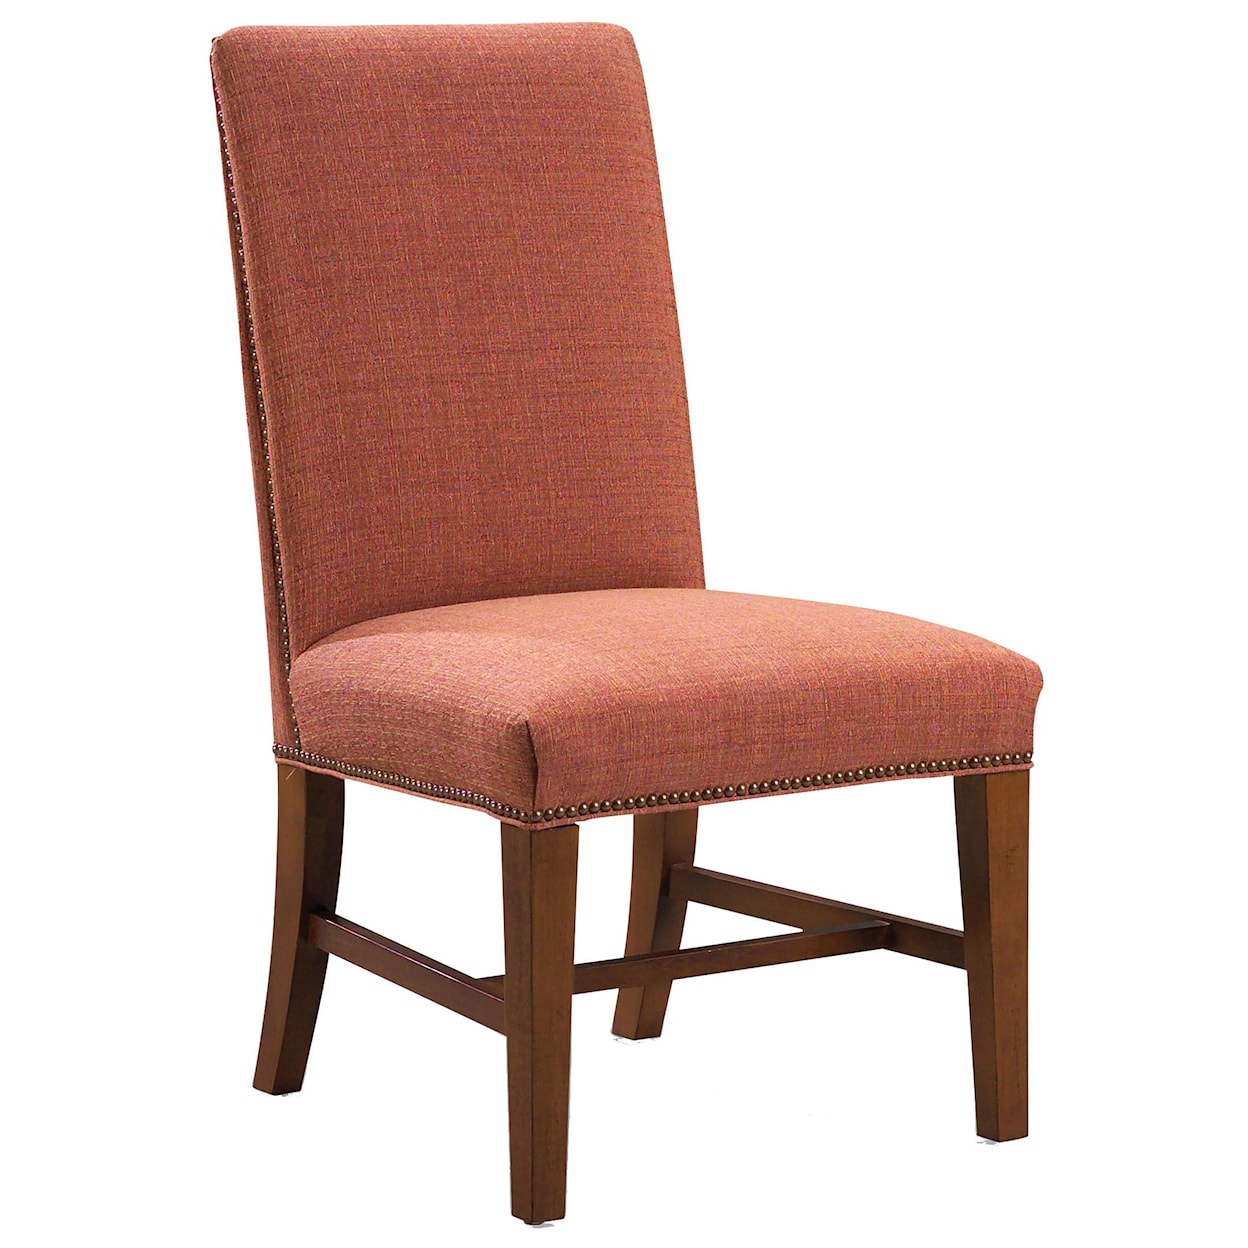 Fairfield 1011  Upholstered Side Chair